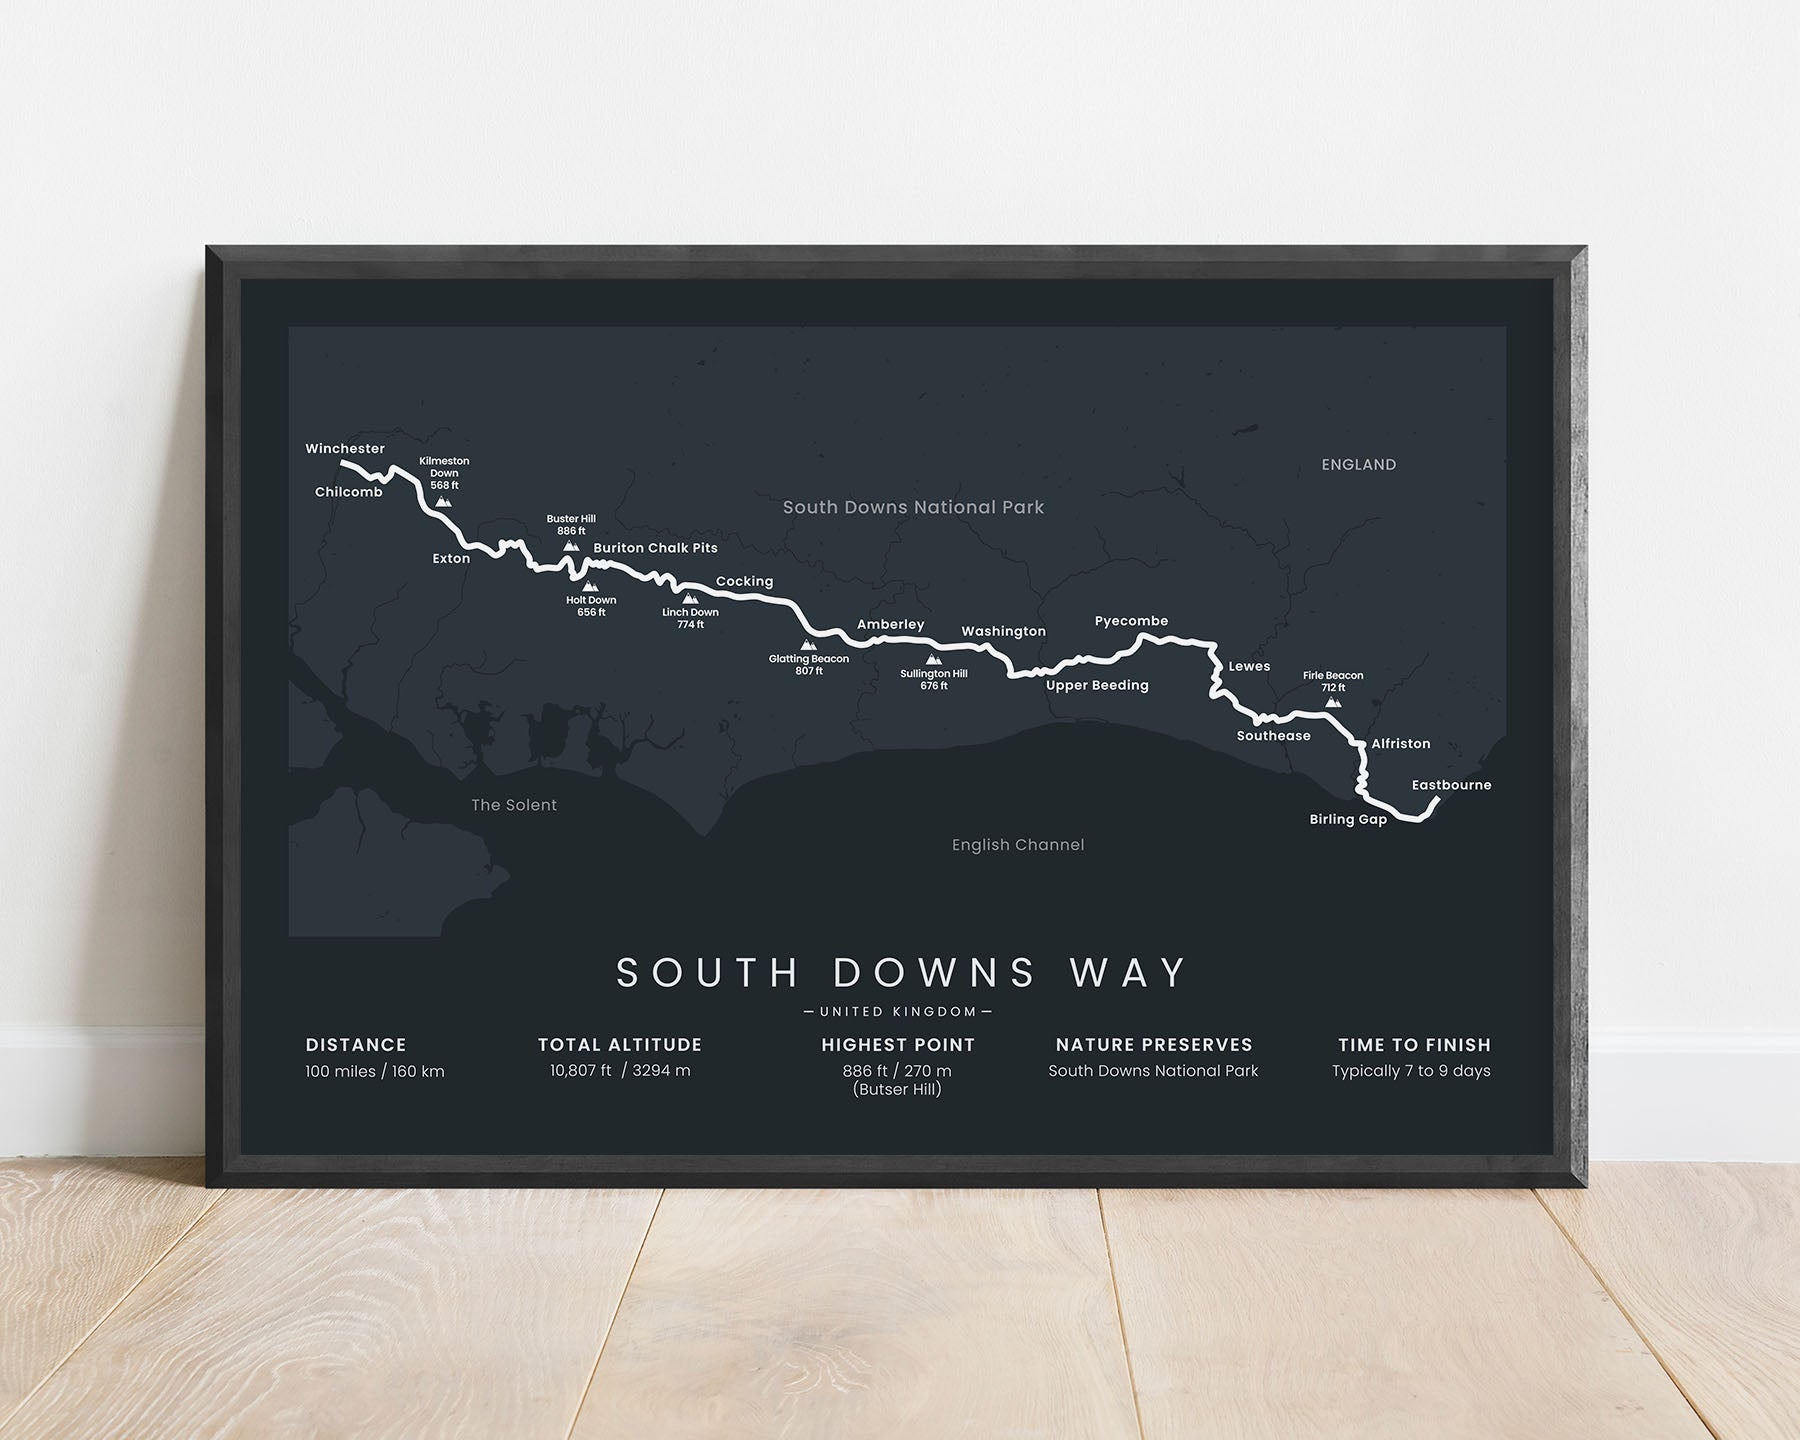 South Downs Way (East Sussex) hike wall map with black background